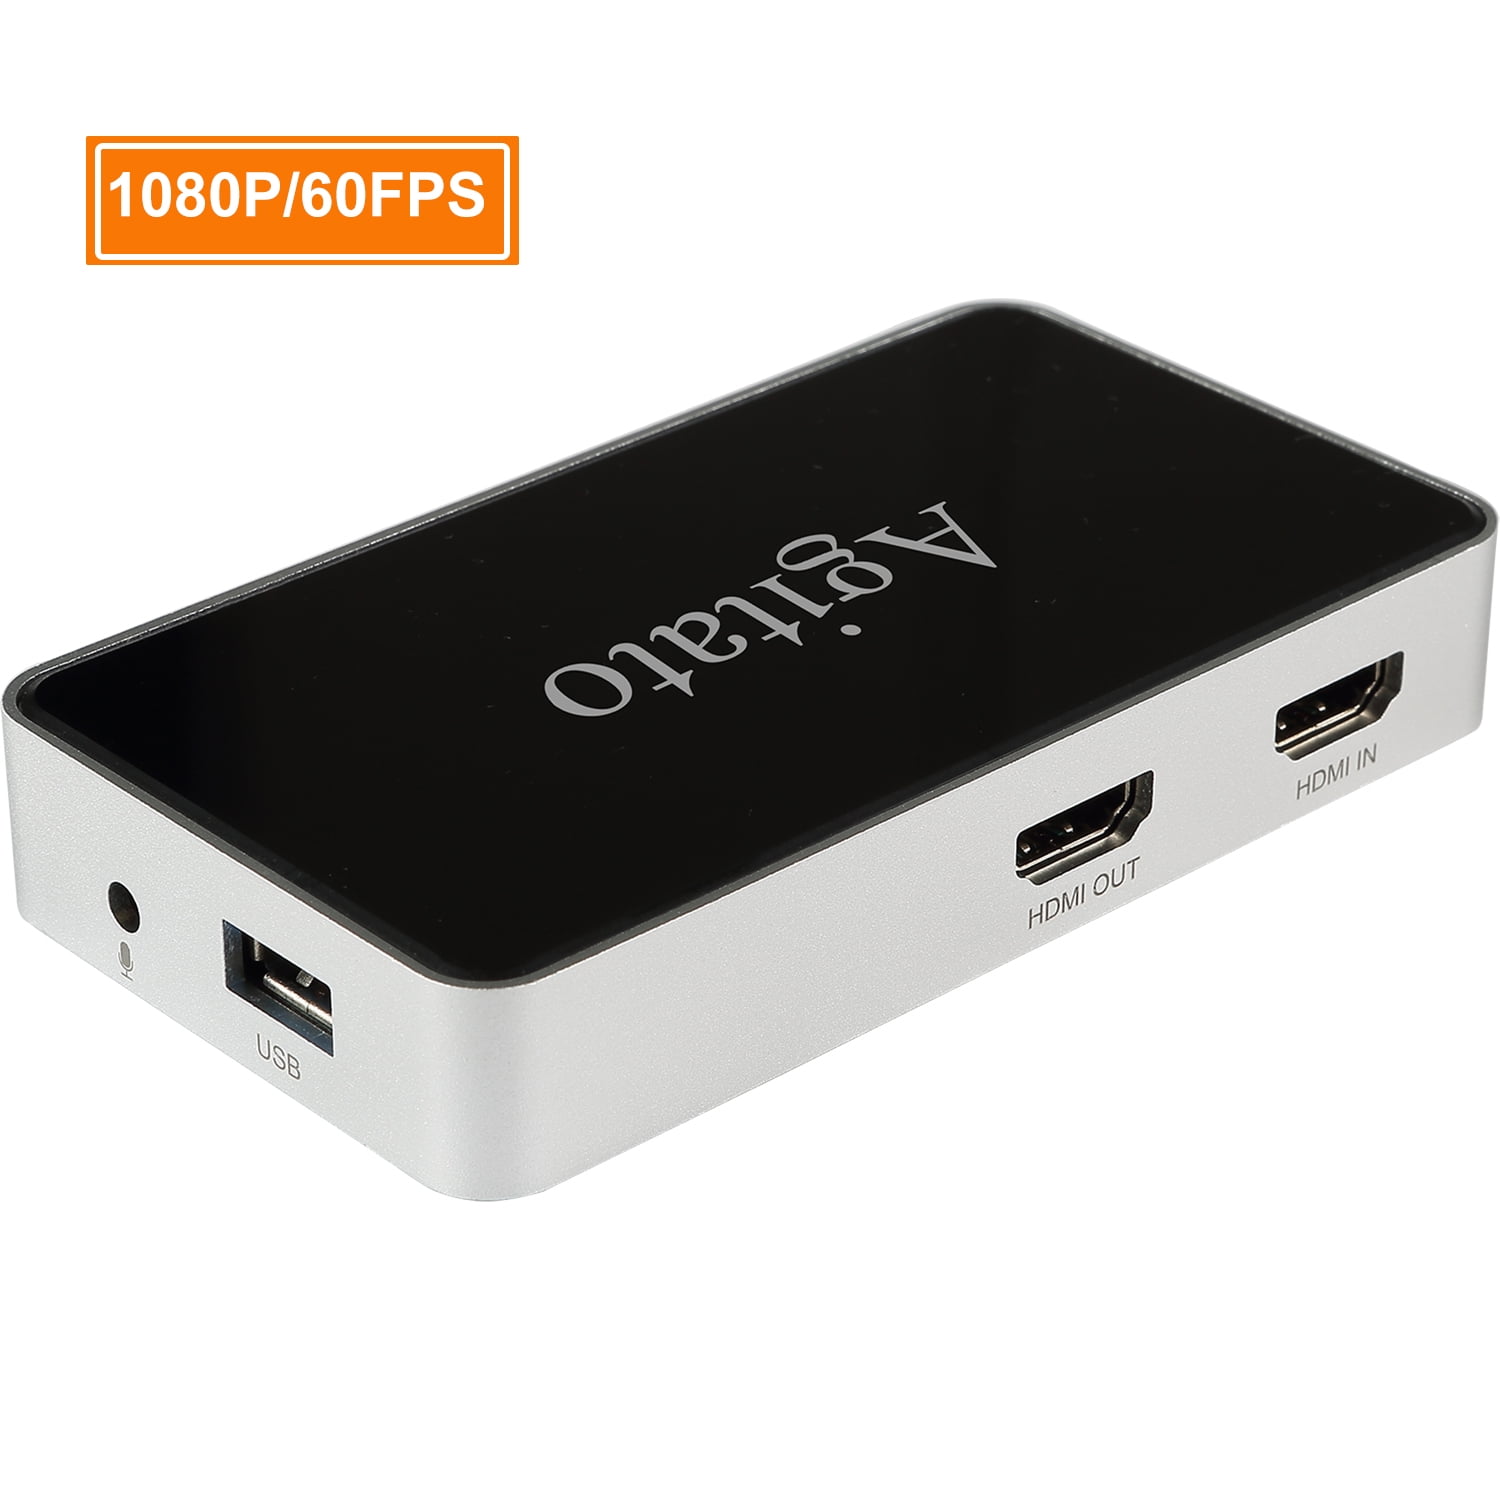 [2020 Latest] Hdmi Game Video Capture Card Hd 1080p 60fps